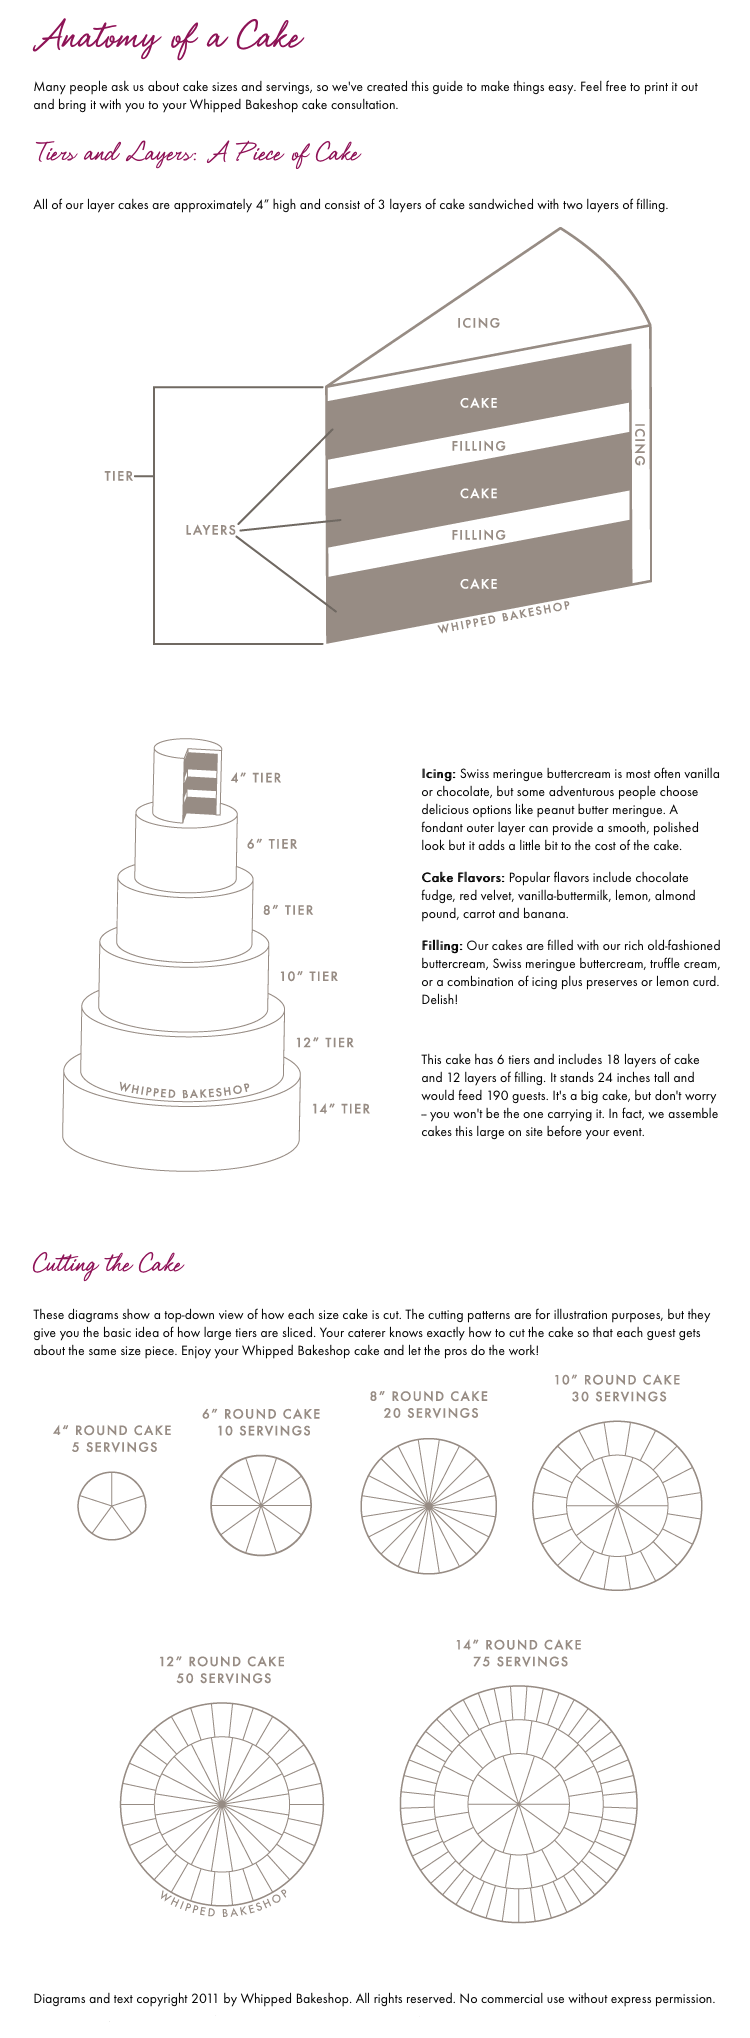 Whipped Bakeshop Anatomy of a Cake